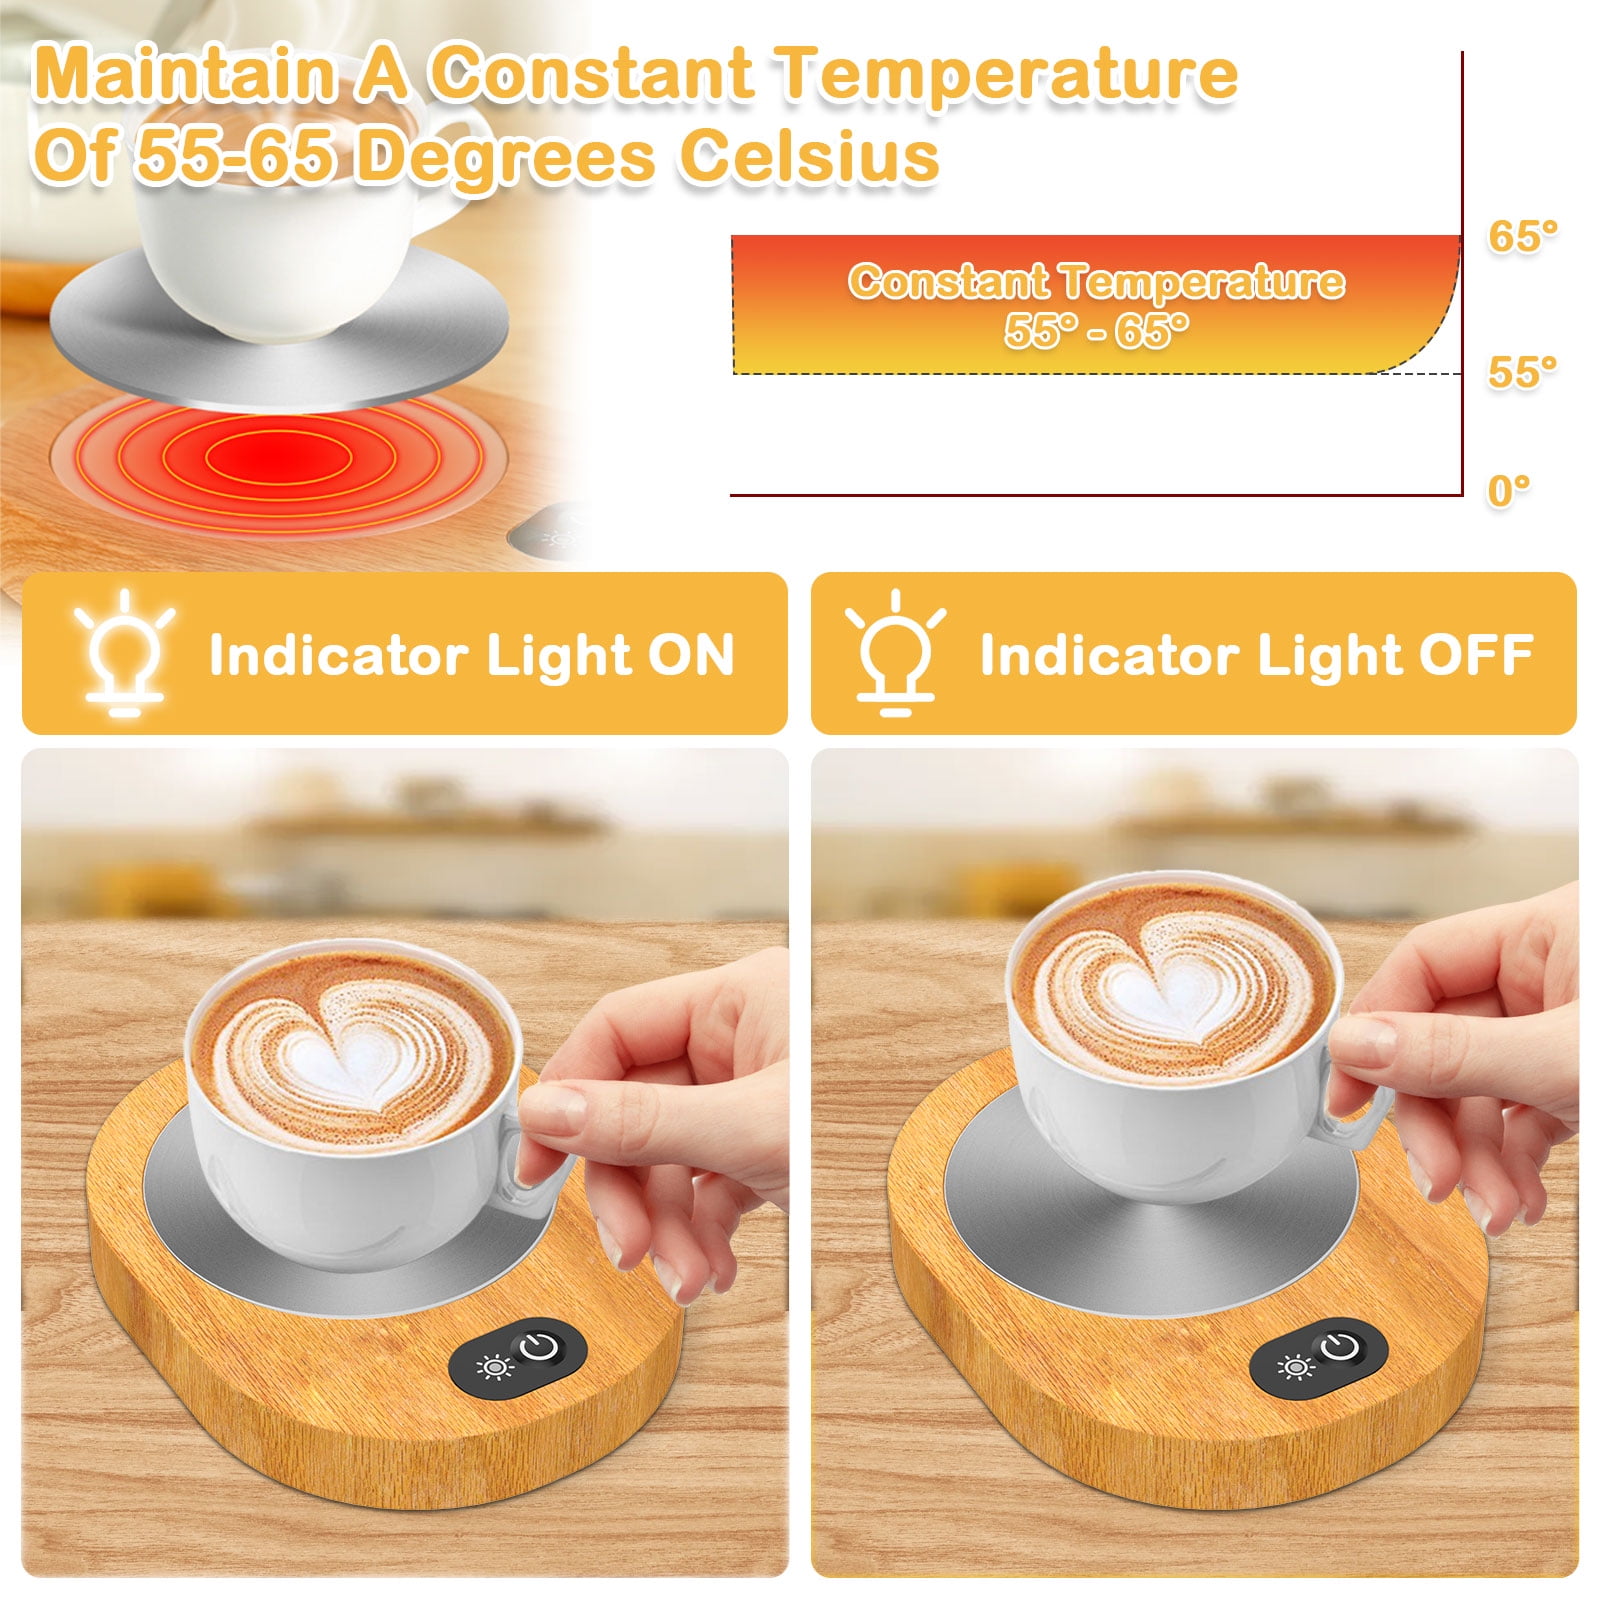 USB Portable cup warmer 2.0 with sleek design and touch pad temperatur